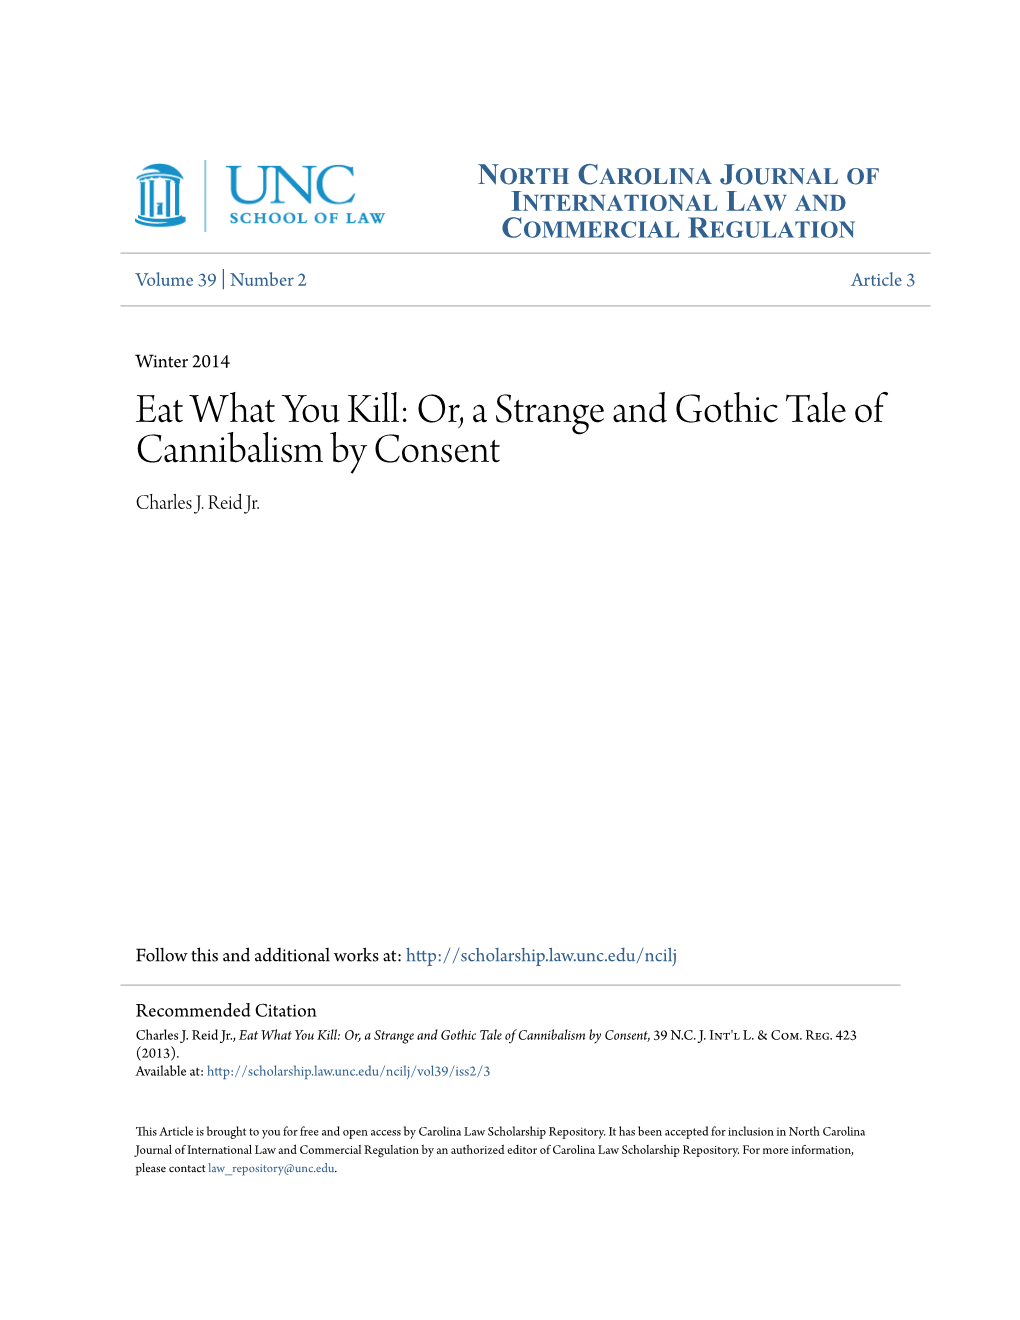 Eat What You Kill: Or, a Strange and Gothic Tale of Cannibalism by Consent Charles J